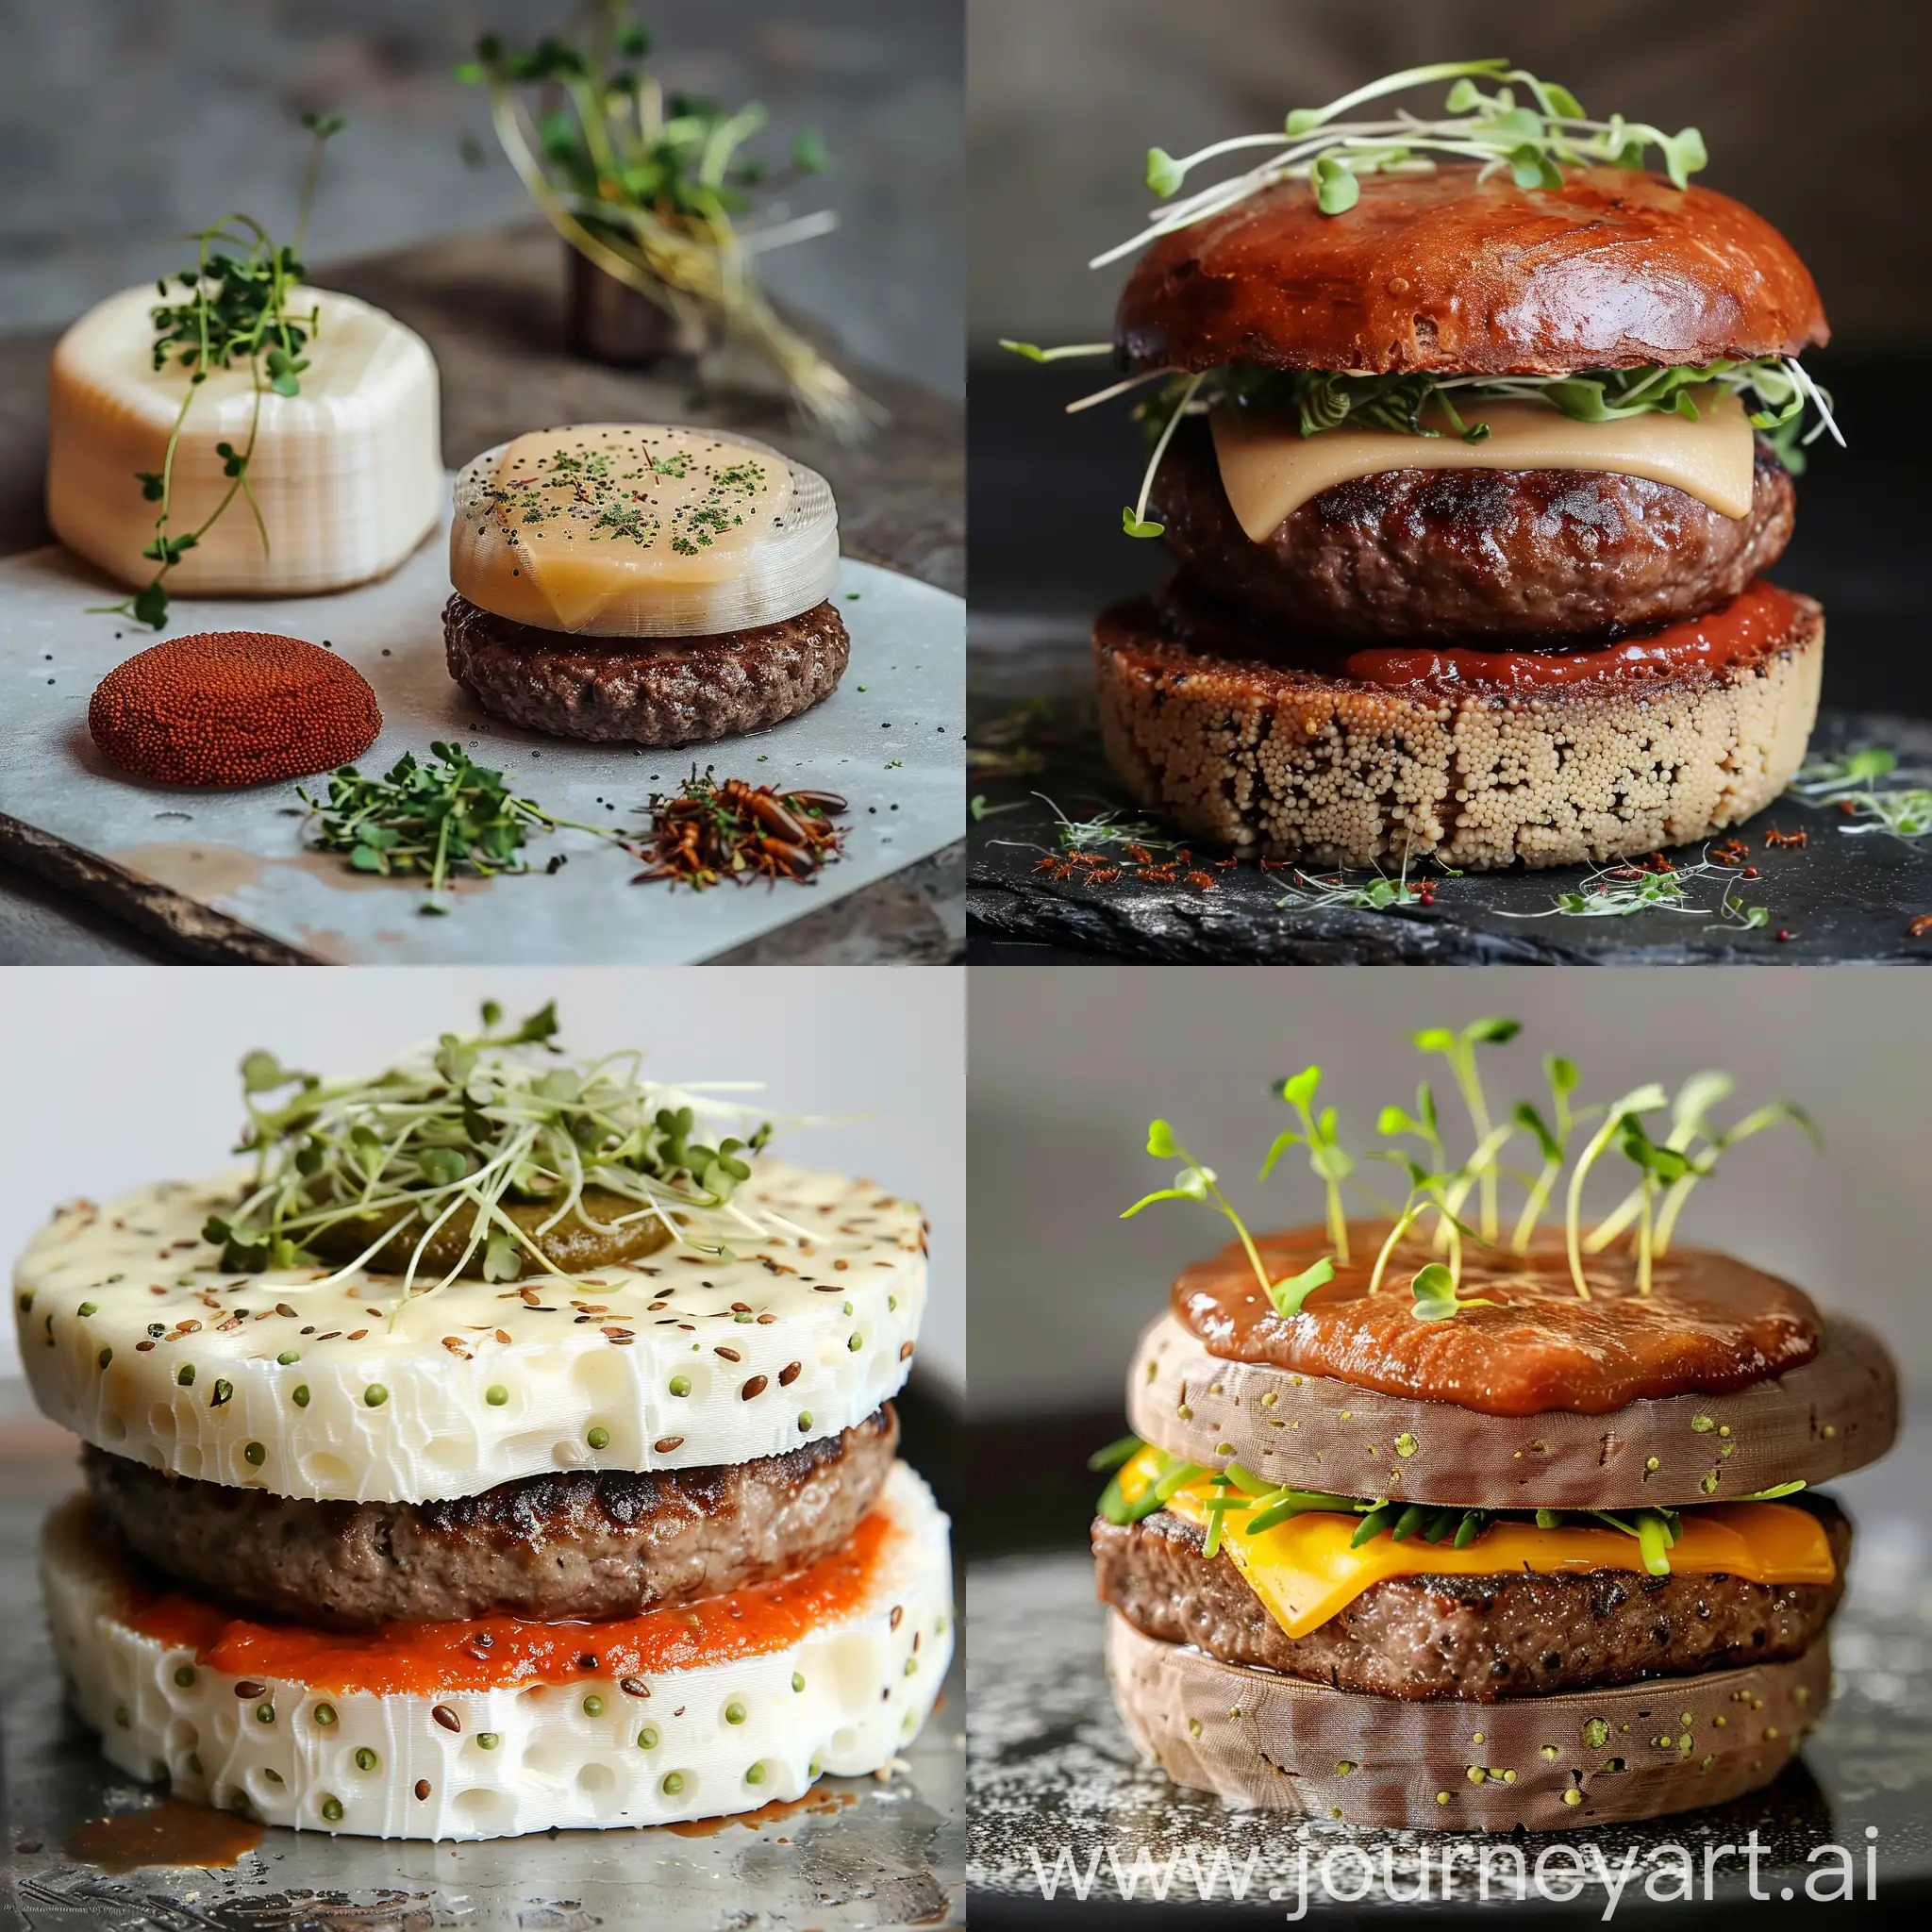 Future healthy burger created by 3D printed bun made with pea protein and algae Lab-grown beef patty Plant-based cheese made from soy and cashews Hydroponically grown microgreens Personalized 3D printed sauce Edible insect toppings